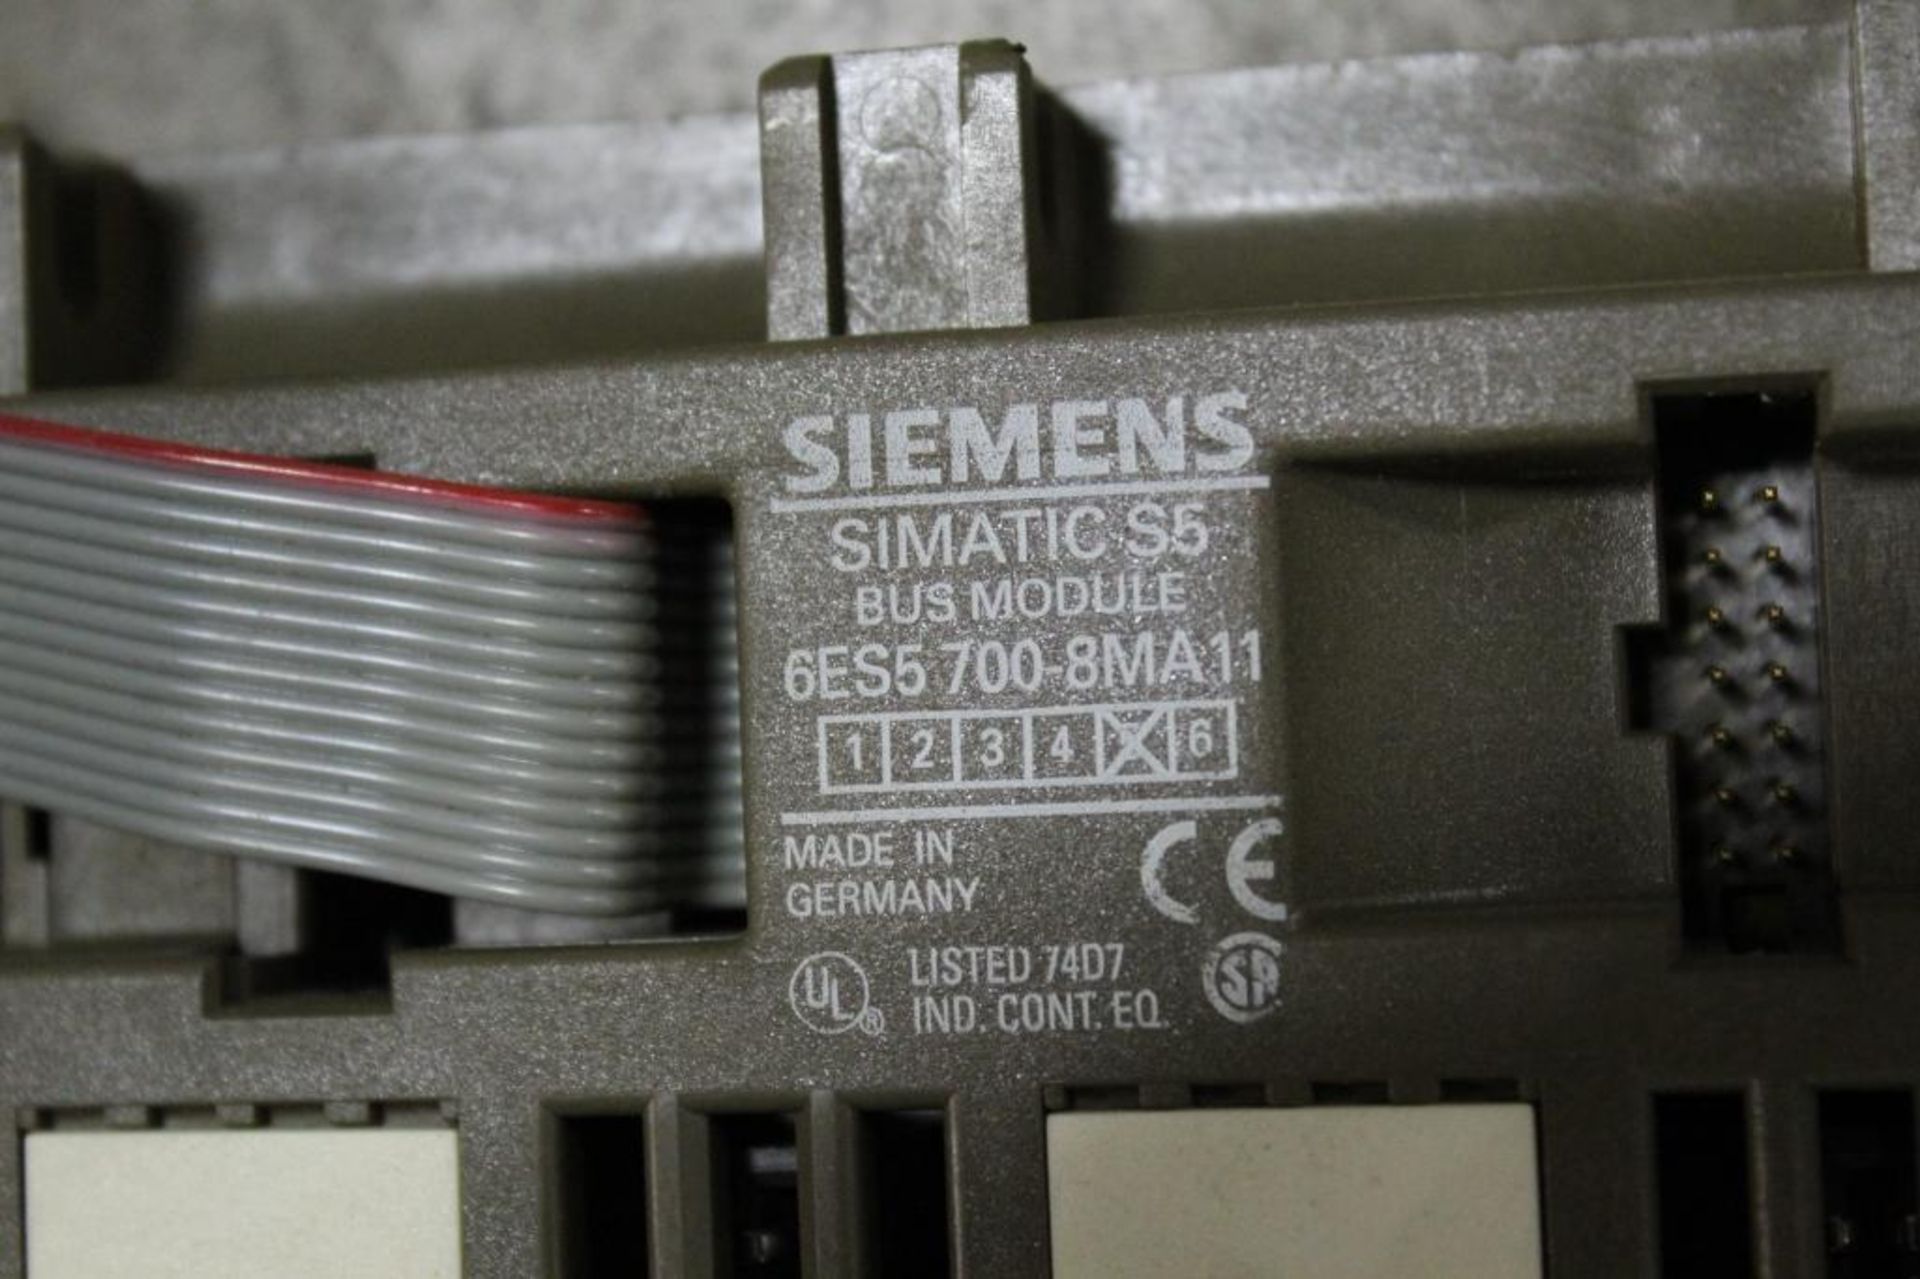 Lot of Siemens Bus Modules - Image 3 of 3